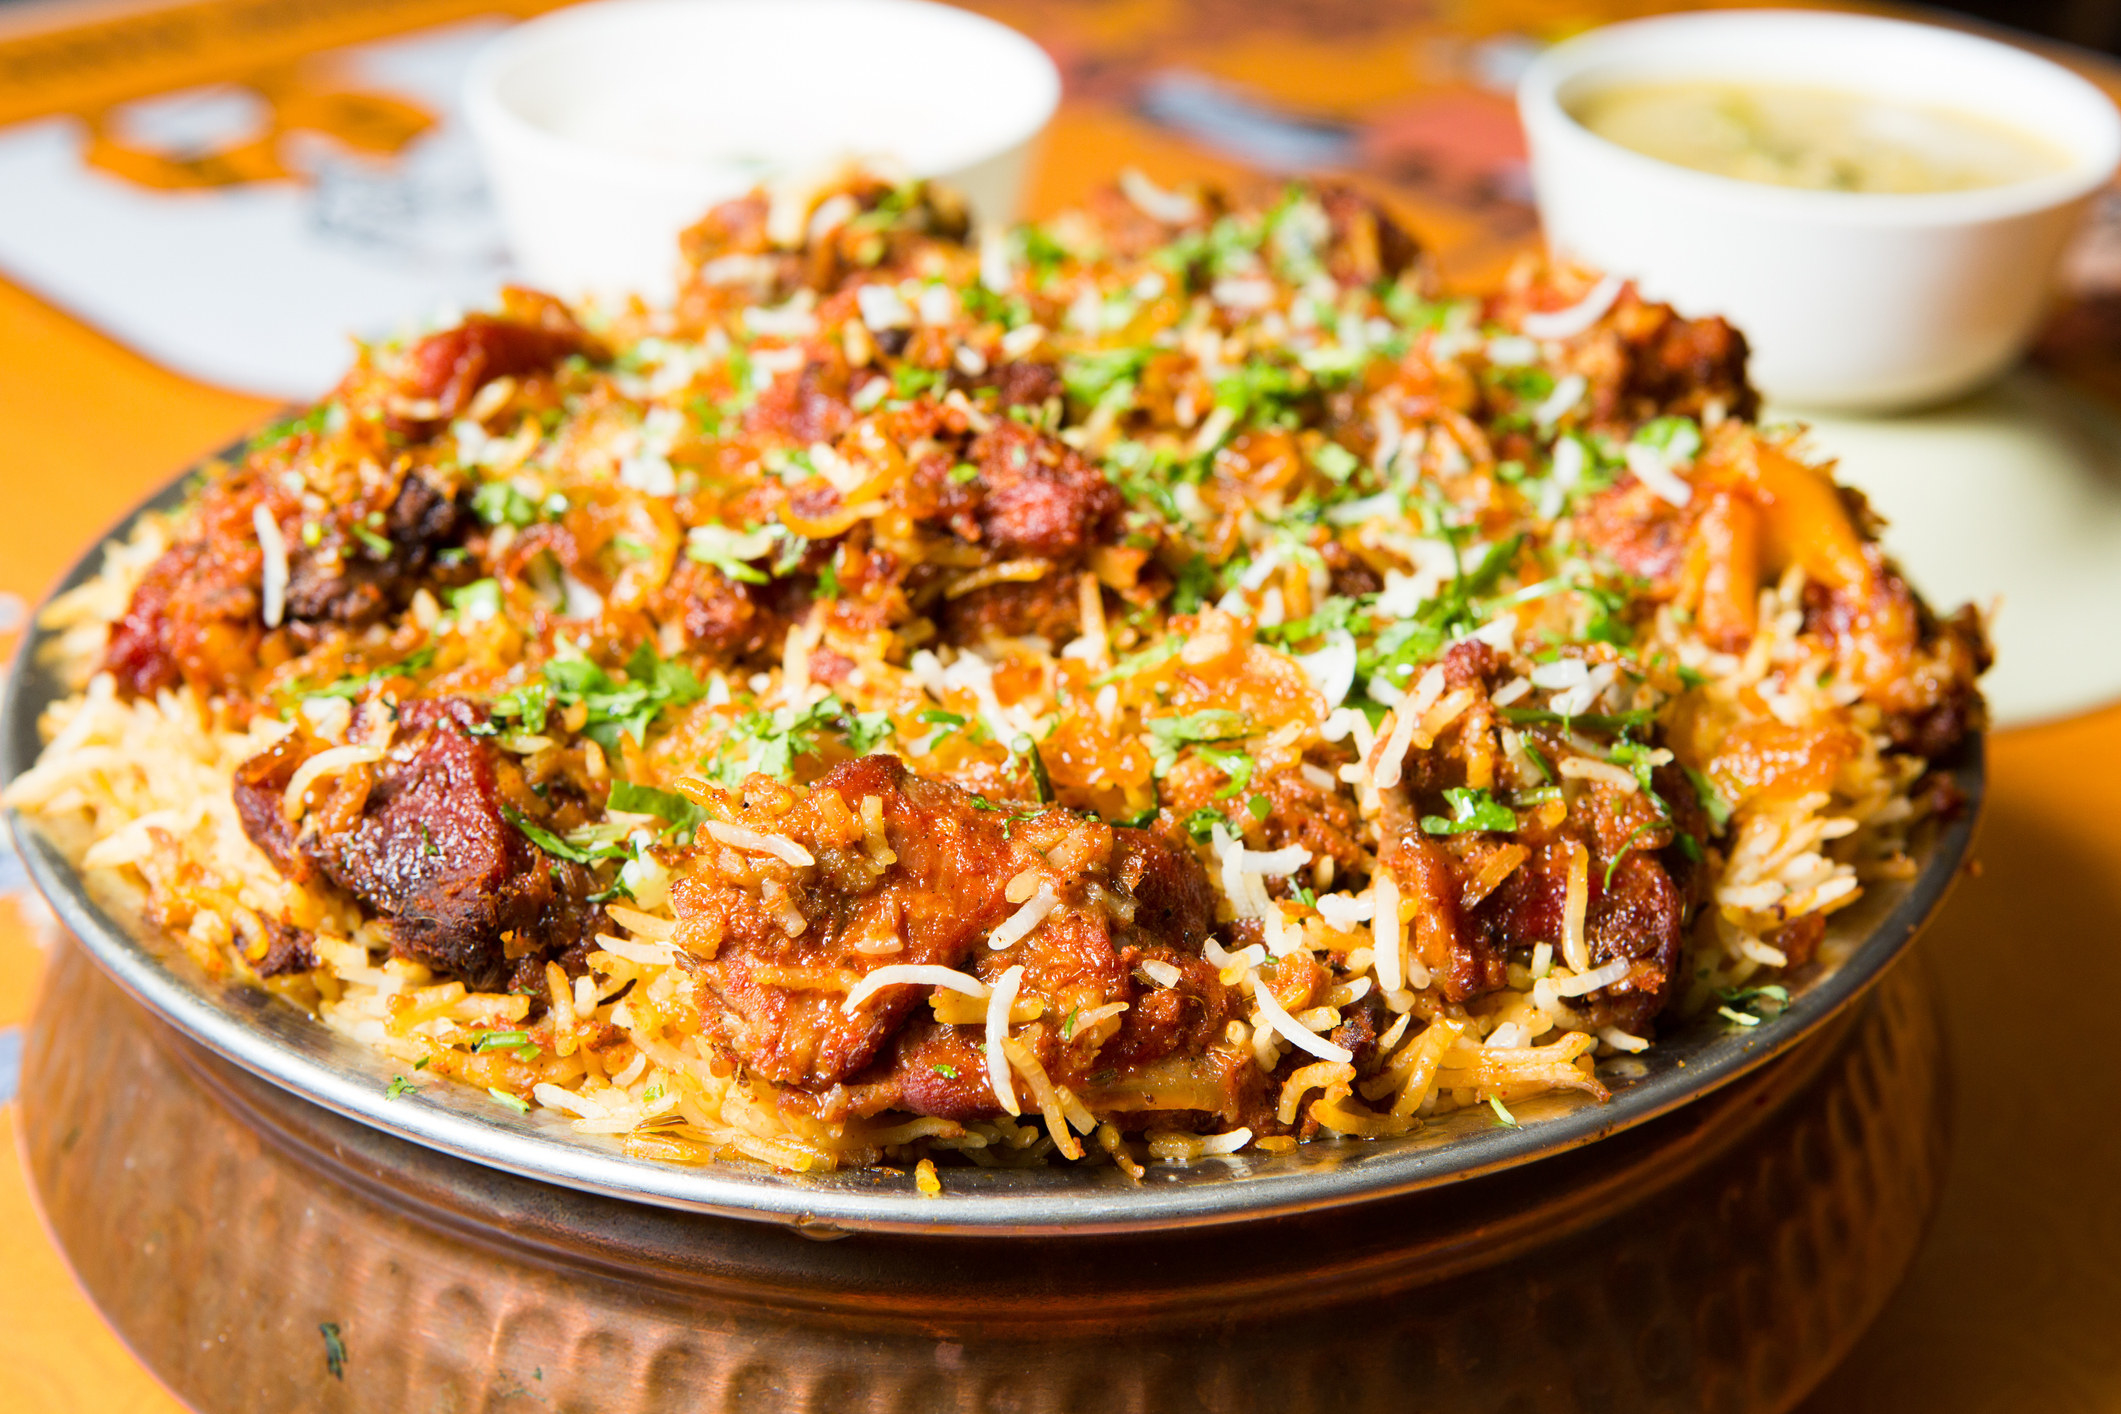 A big plate of biryani with meat.